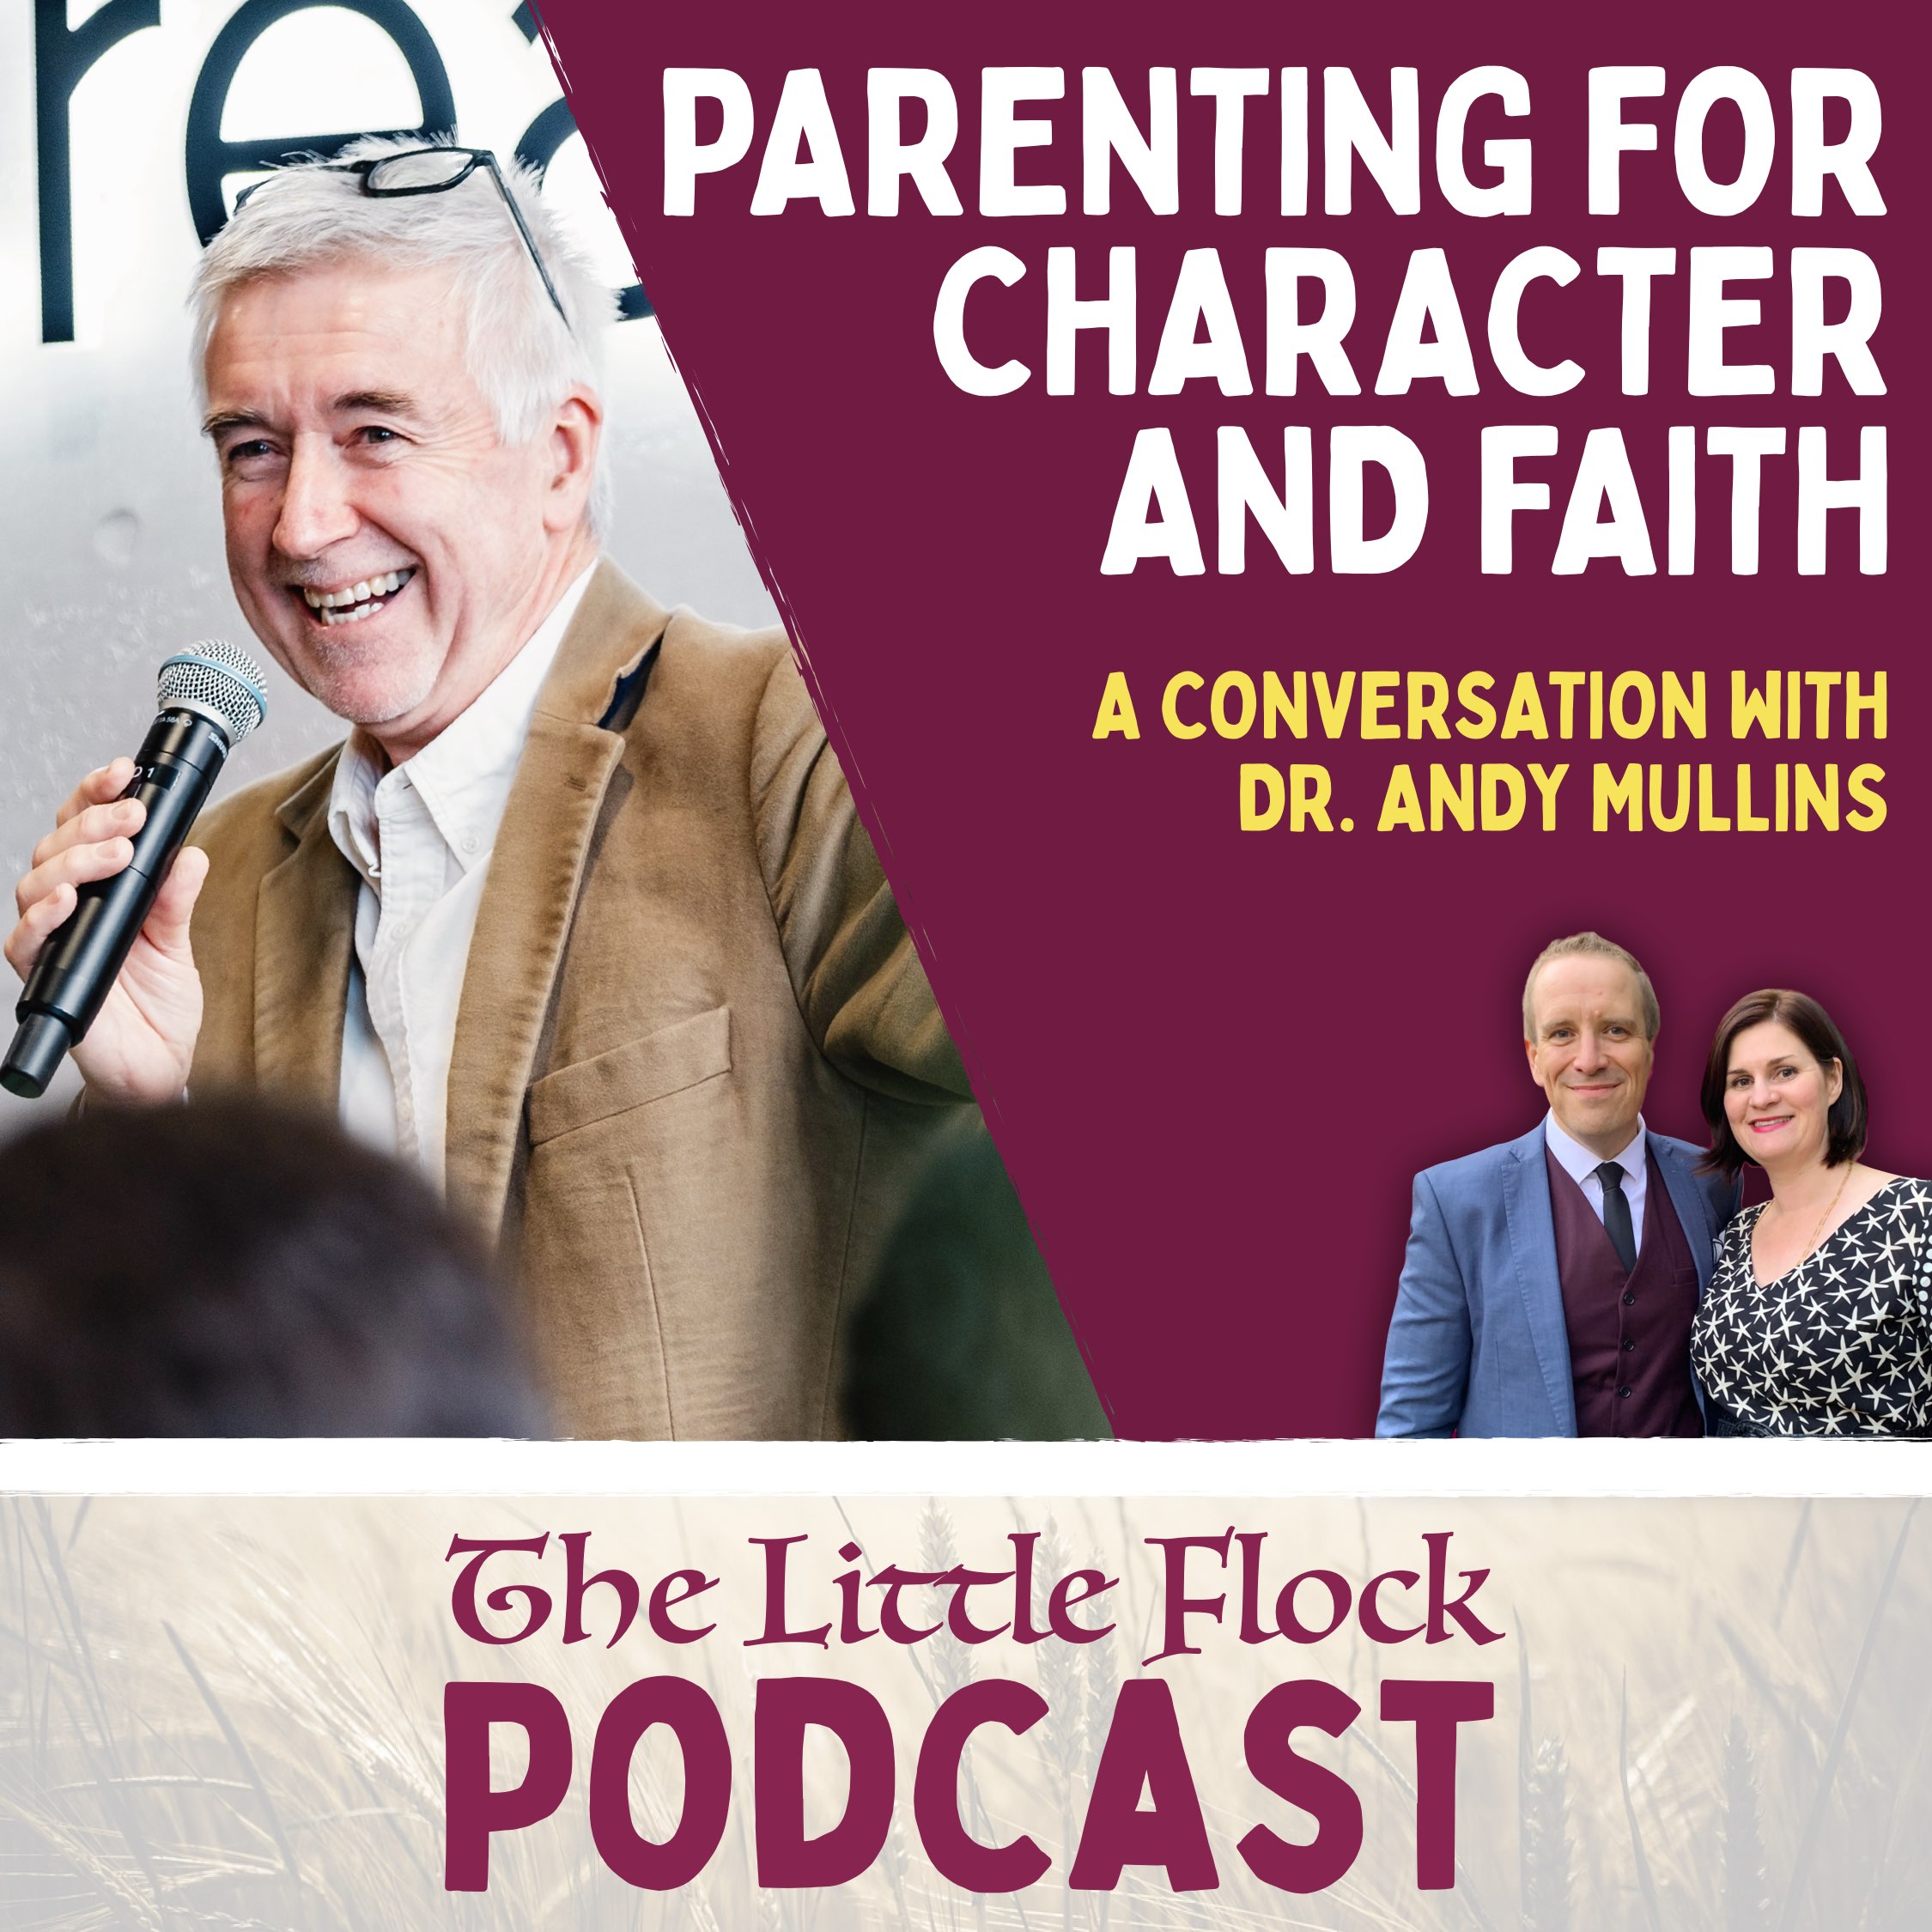 14. Parenting For Character And Faith - A Conversation With Dr. Andy Mullins